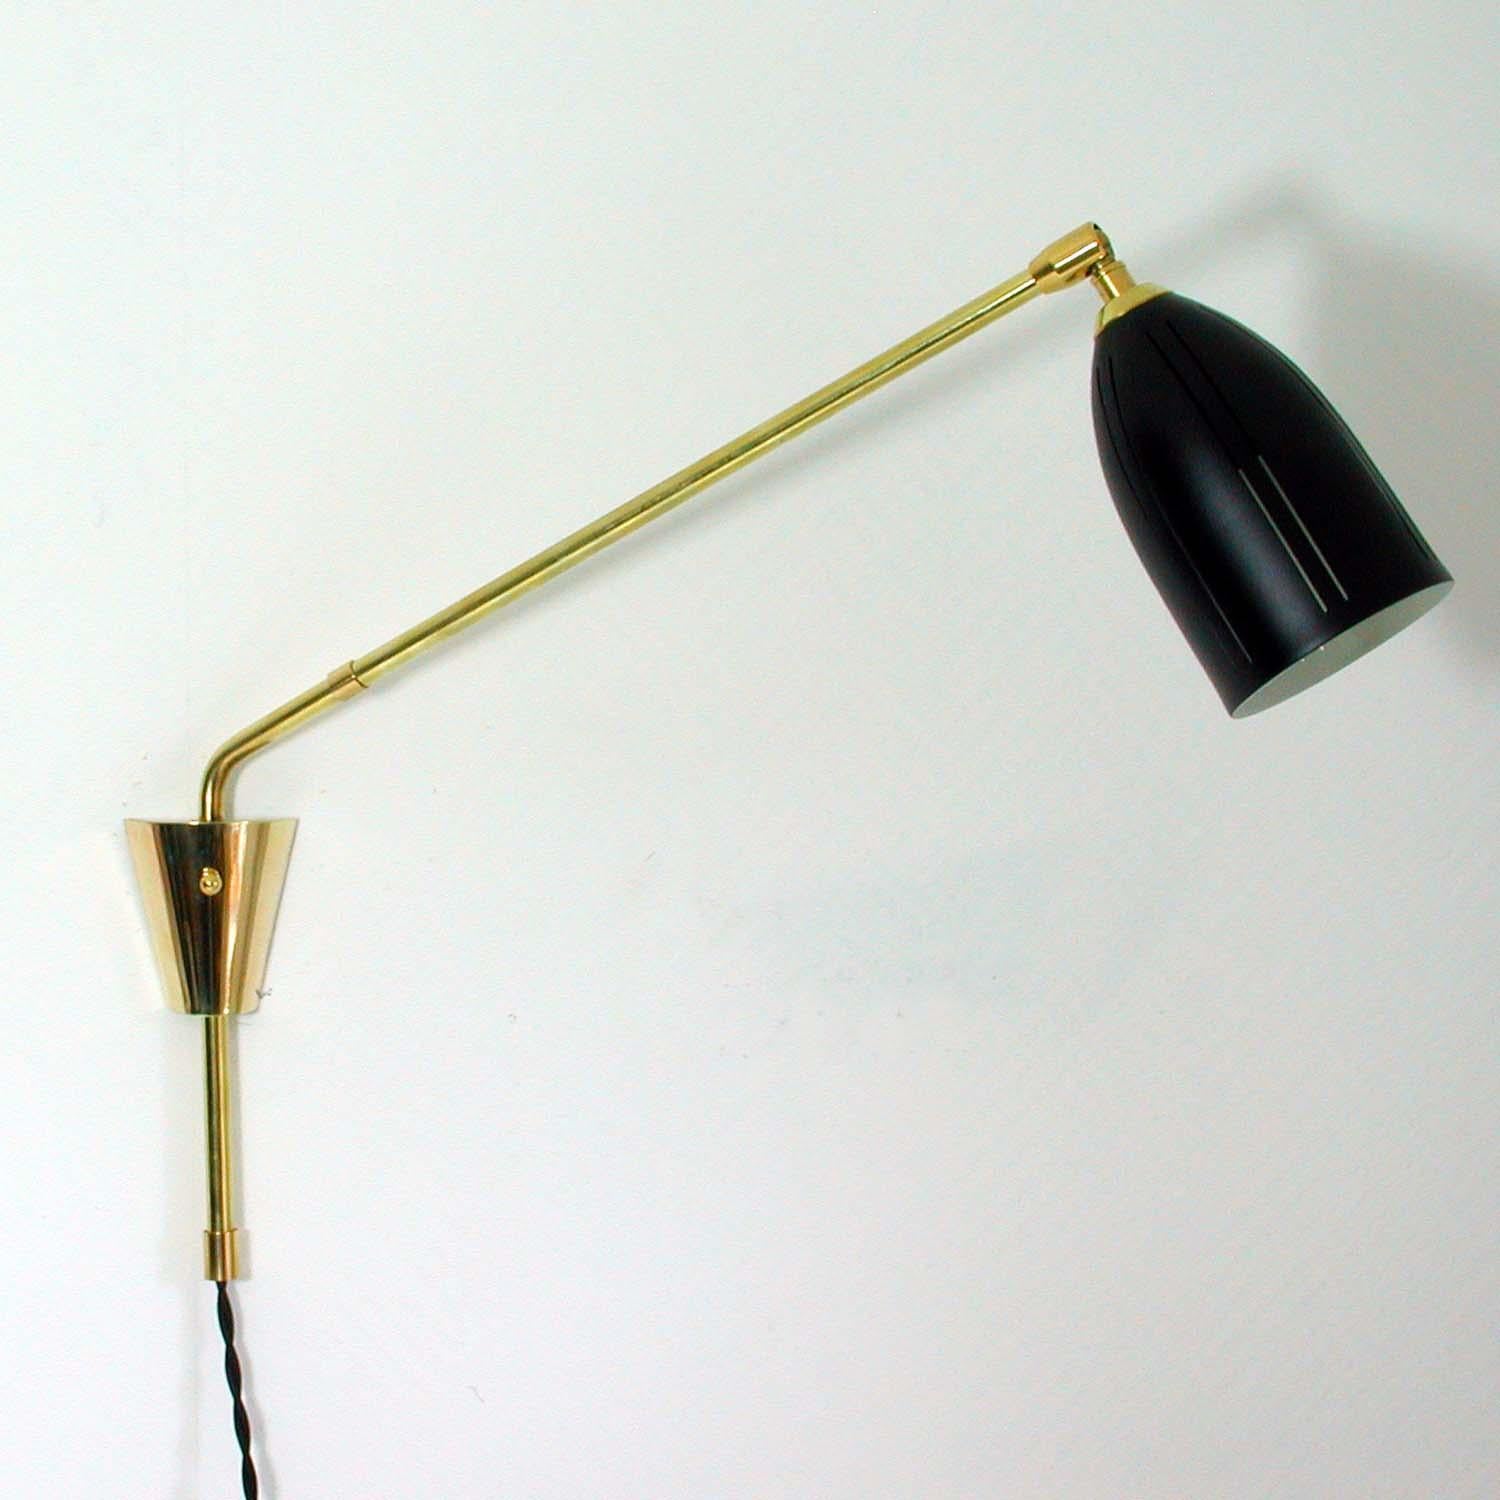 Awesome swivelling French wall lamp with adjustable shade. The lamp has got a lampshade made of black lacquered metal. The swivelling lamp arm is made of brass.

The lamp has been rewired for use in US and has got an E27 Edison screw on socket and